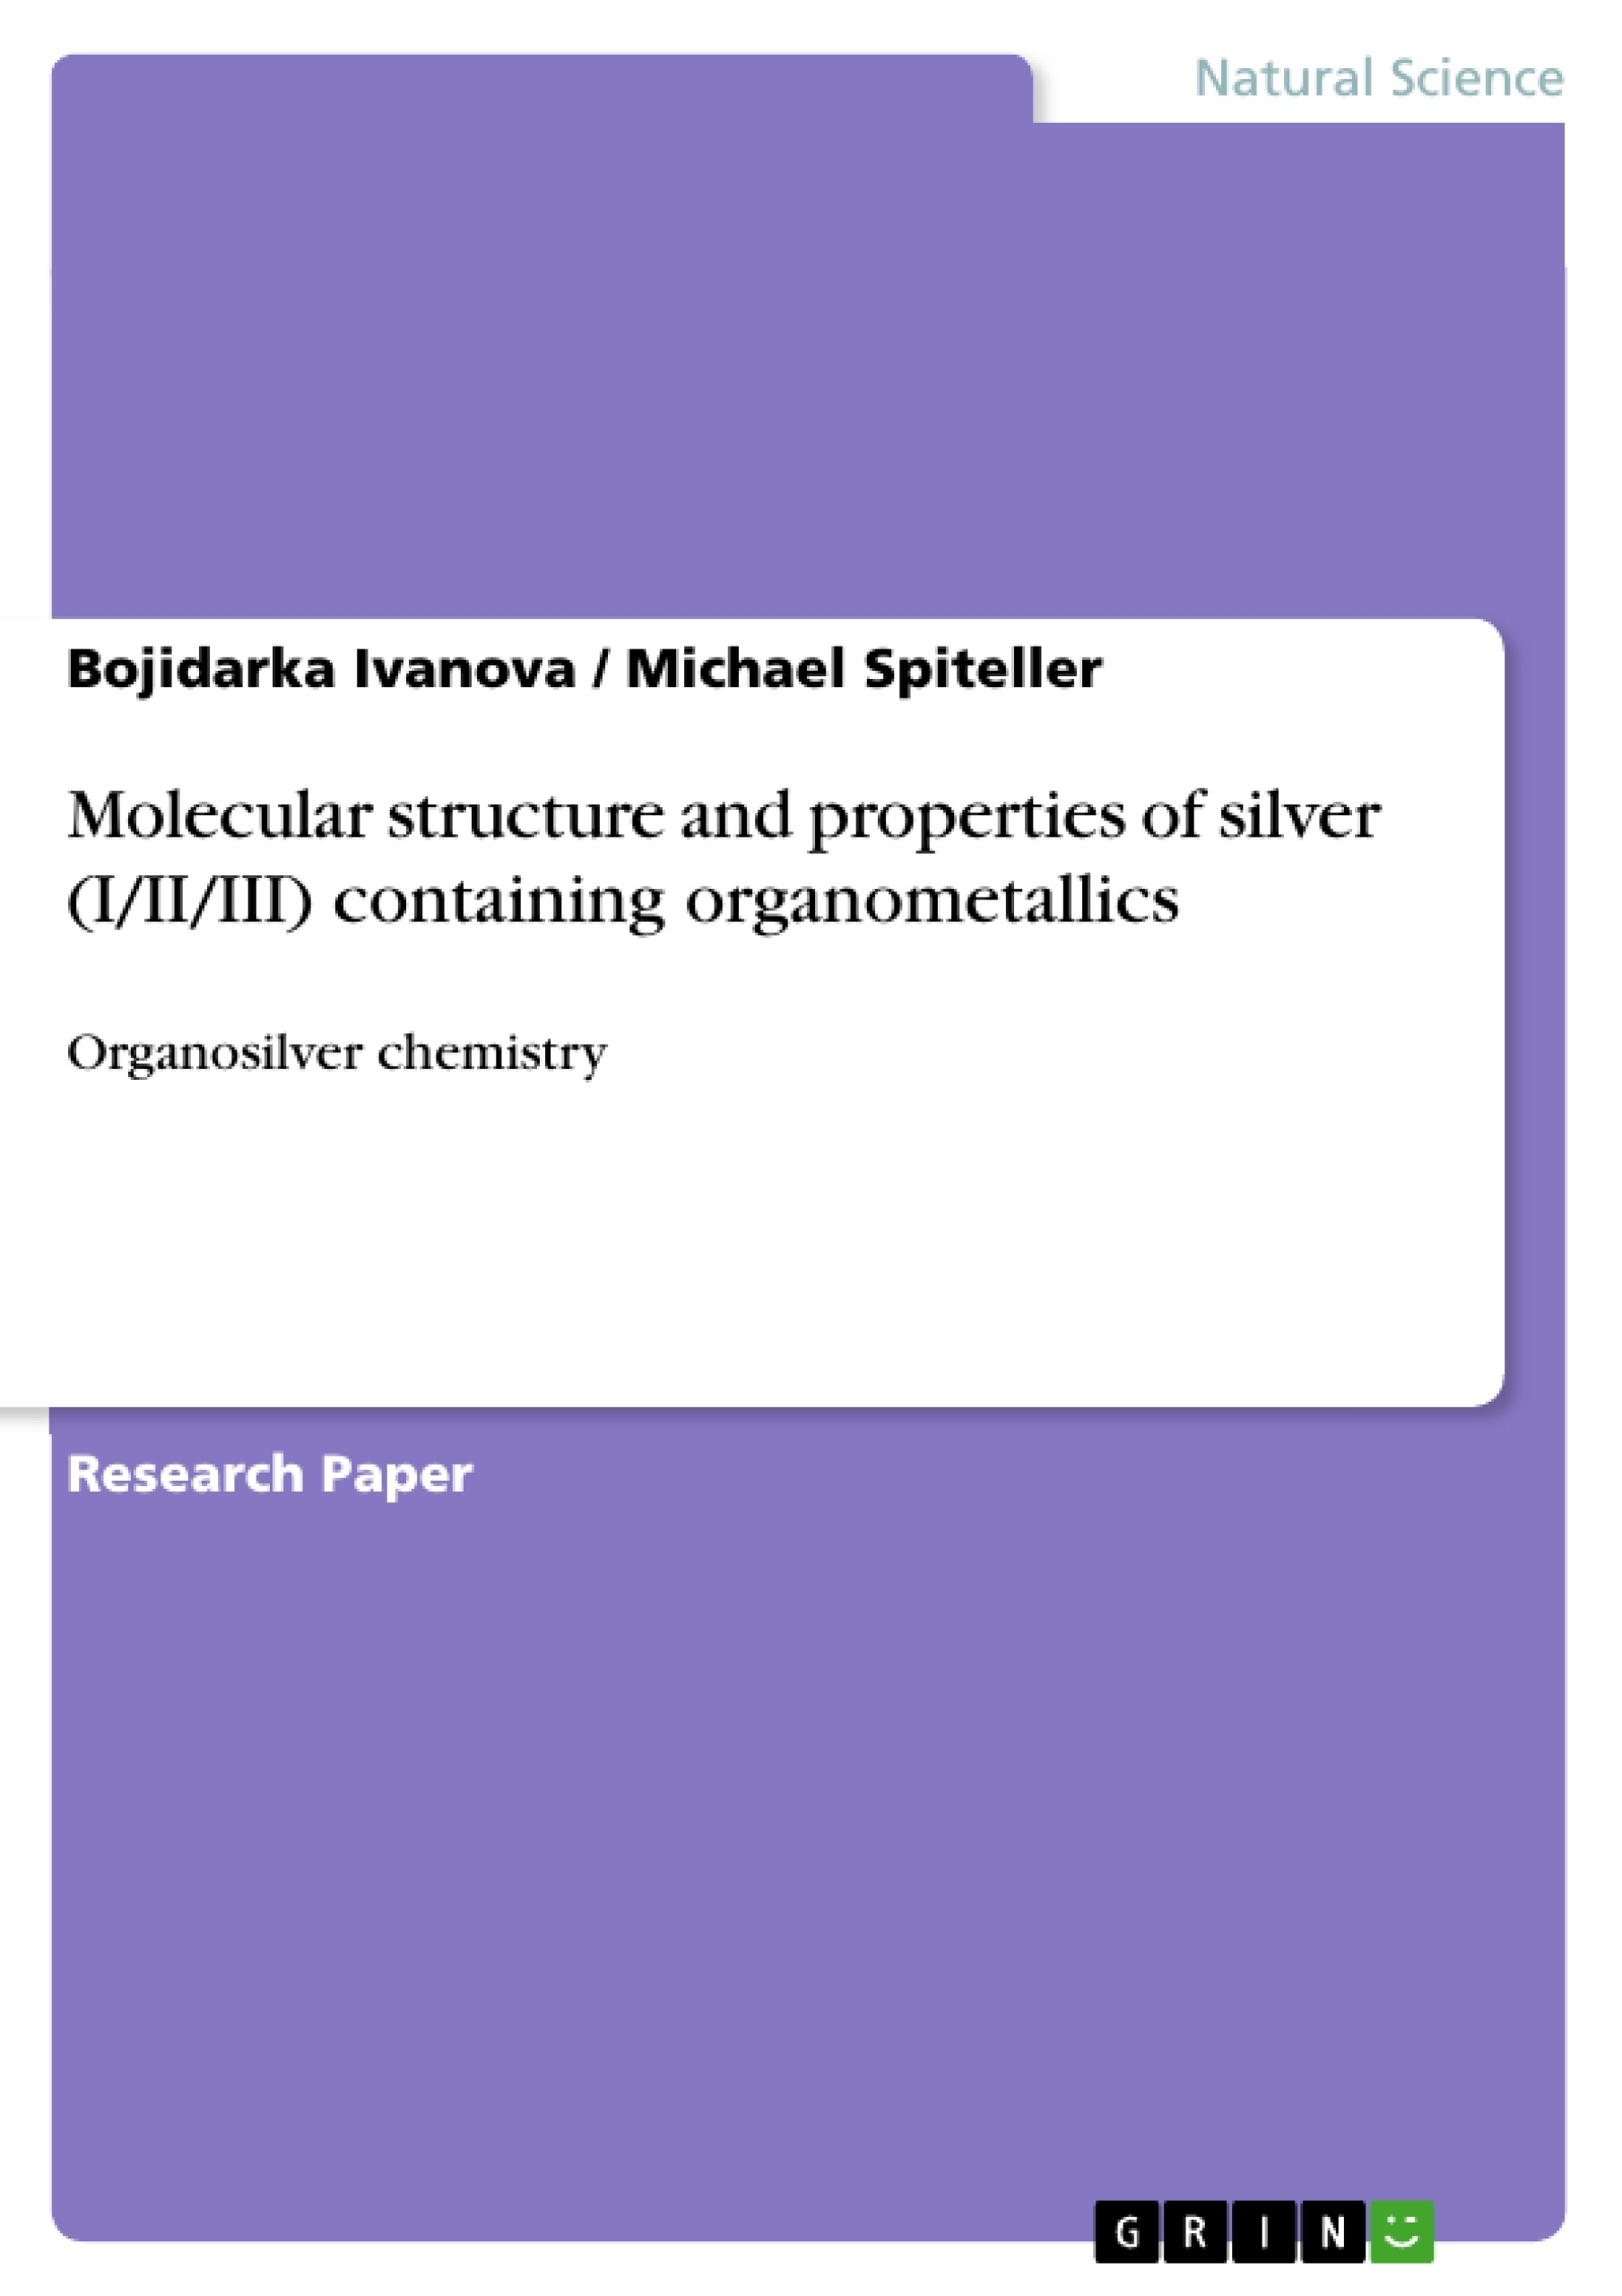 Título: Molecular structure and properties of silver (I/II/III) containing organometallics